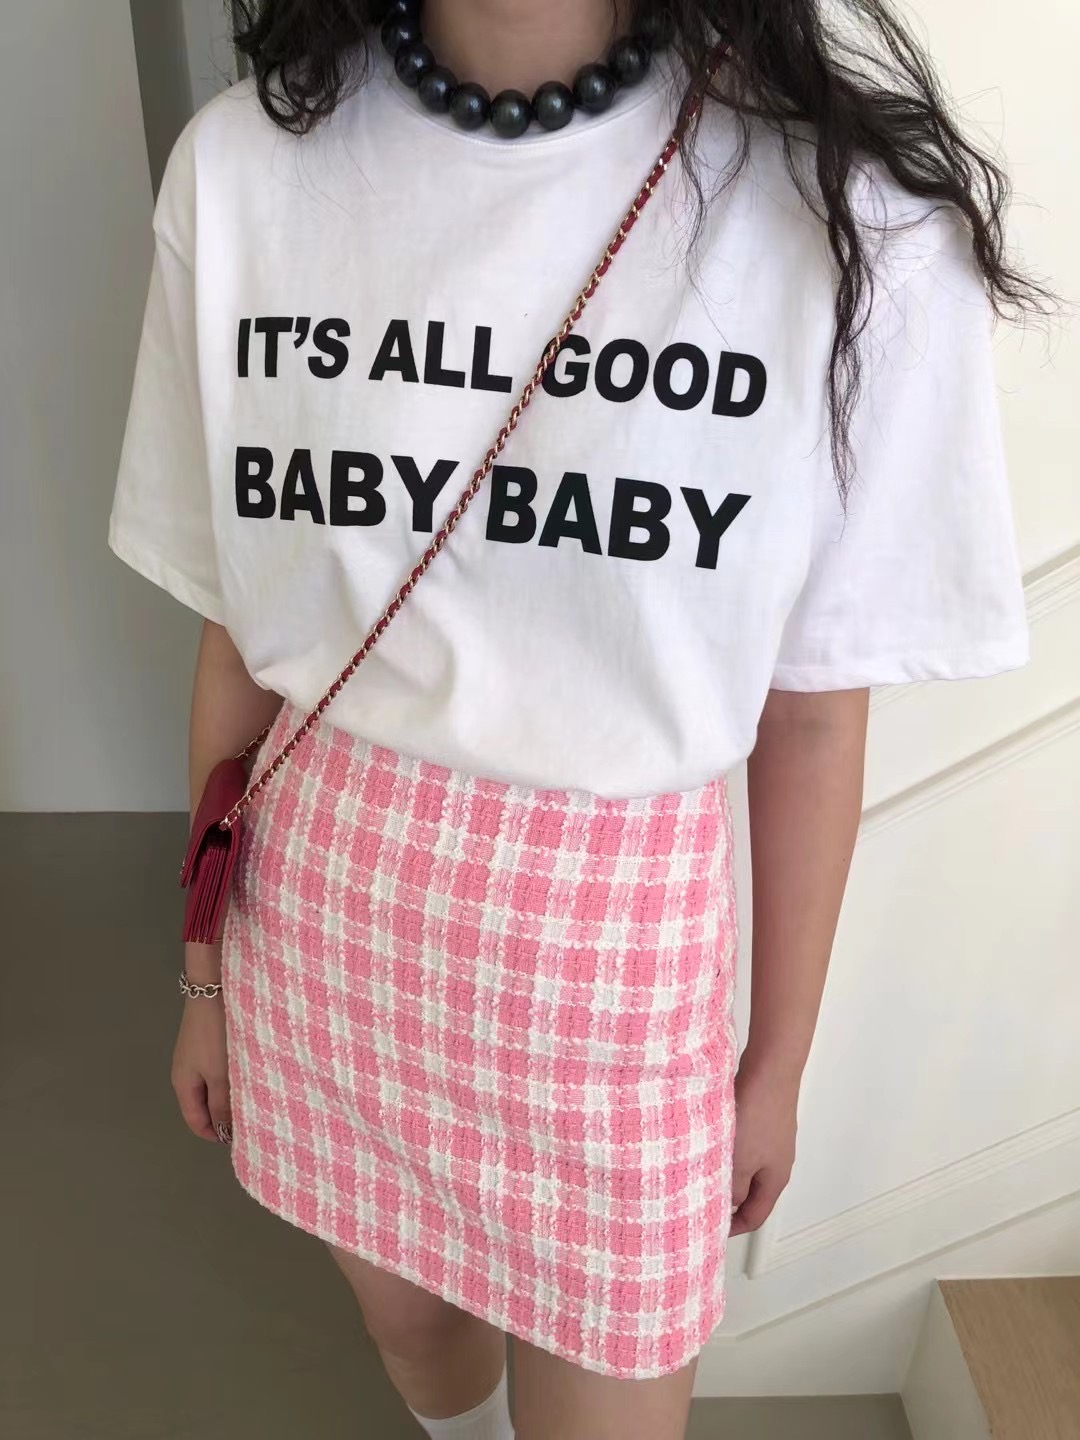 REPELLER S/S 2022 女裝半身裙 (3 COLOR)